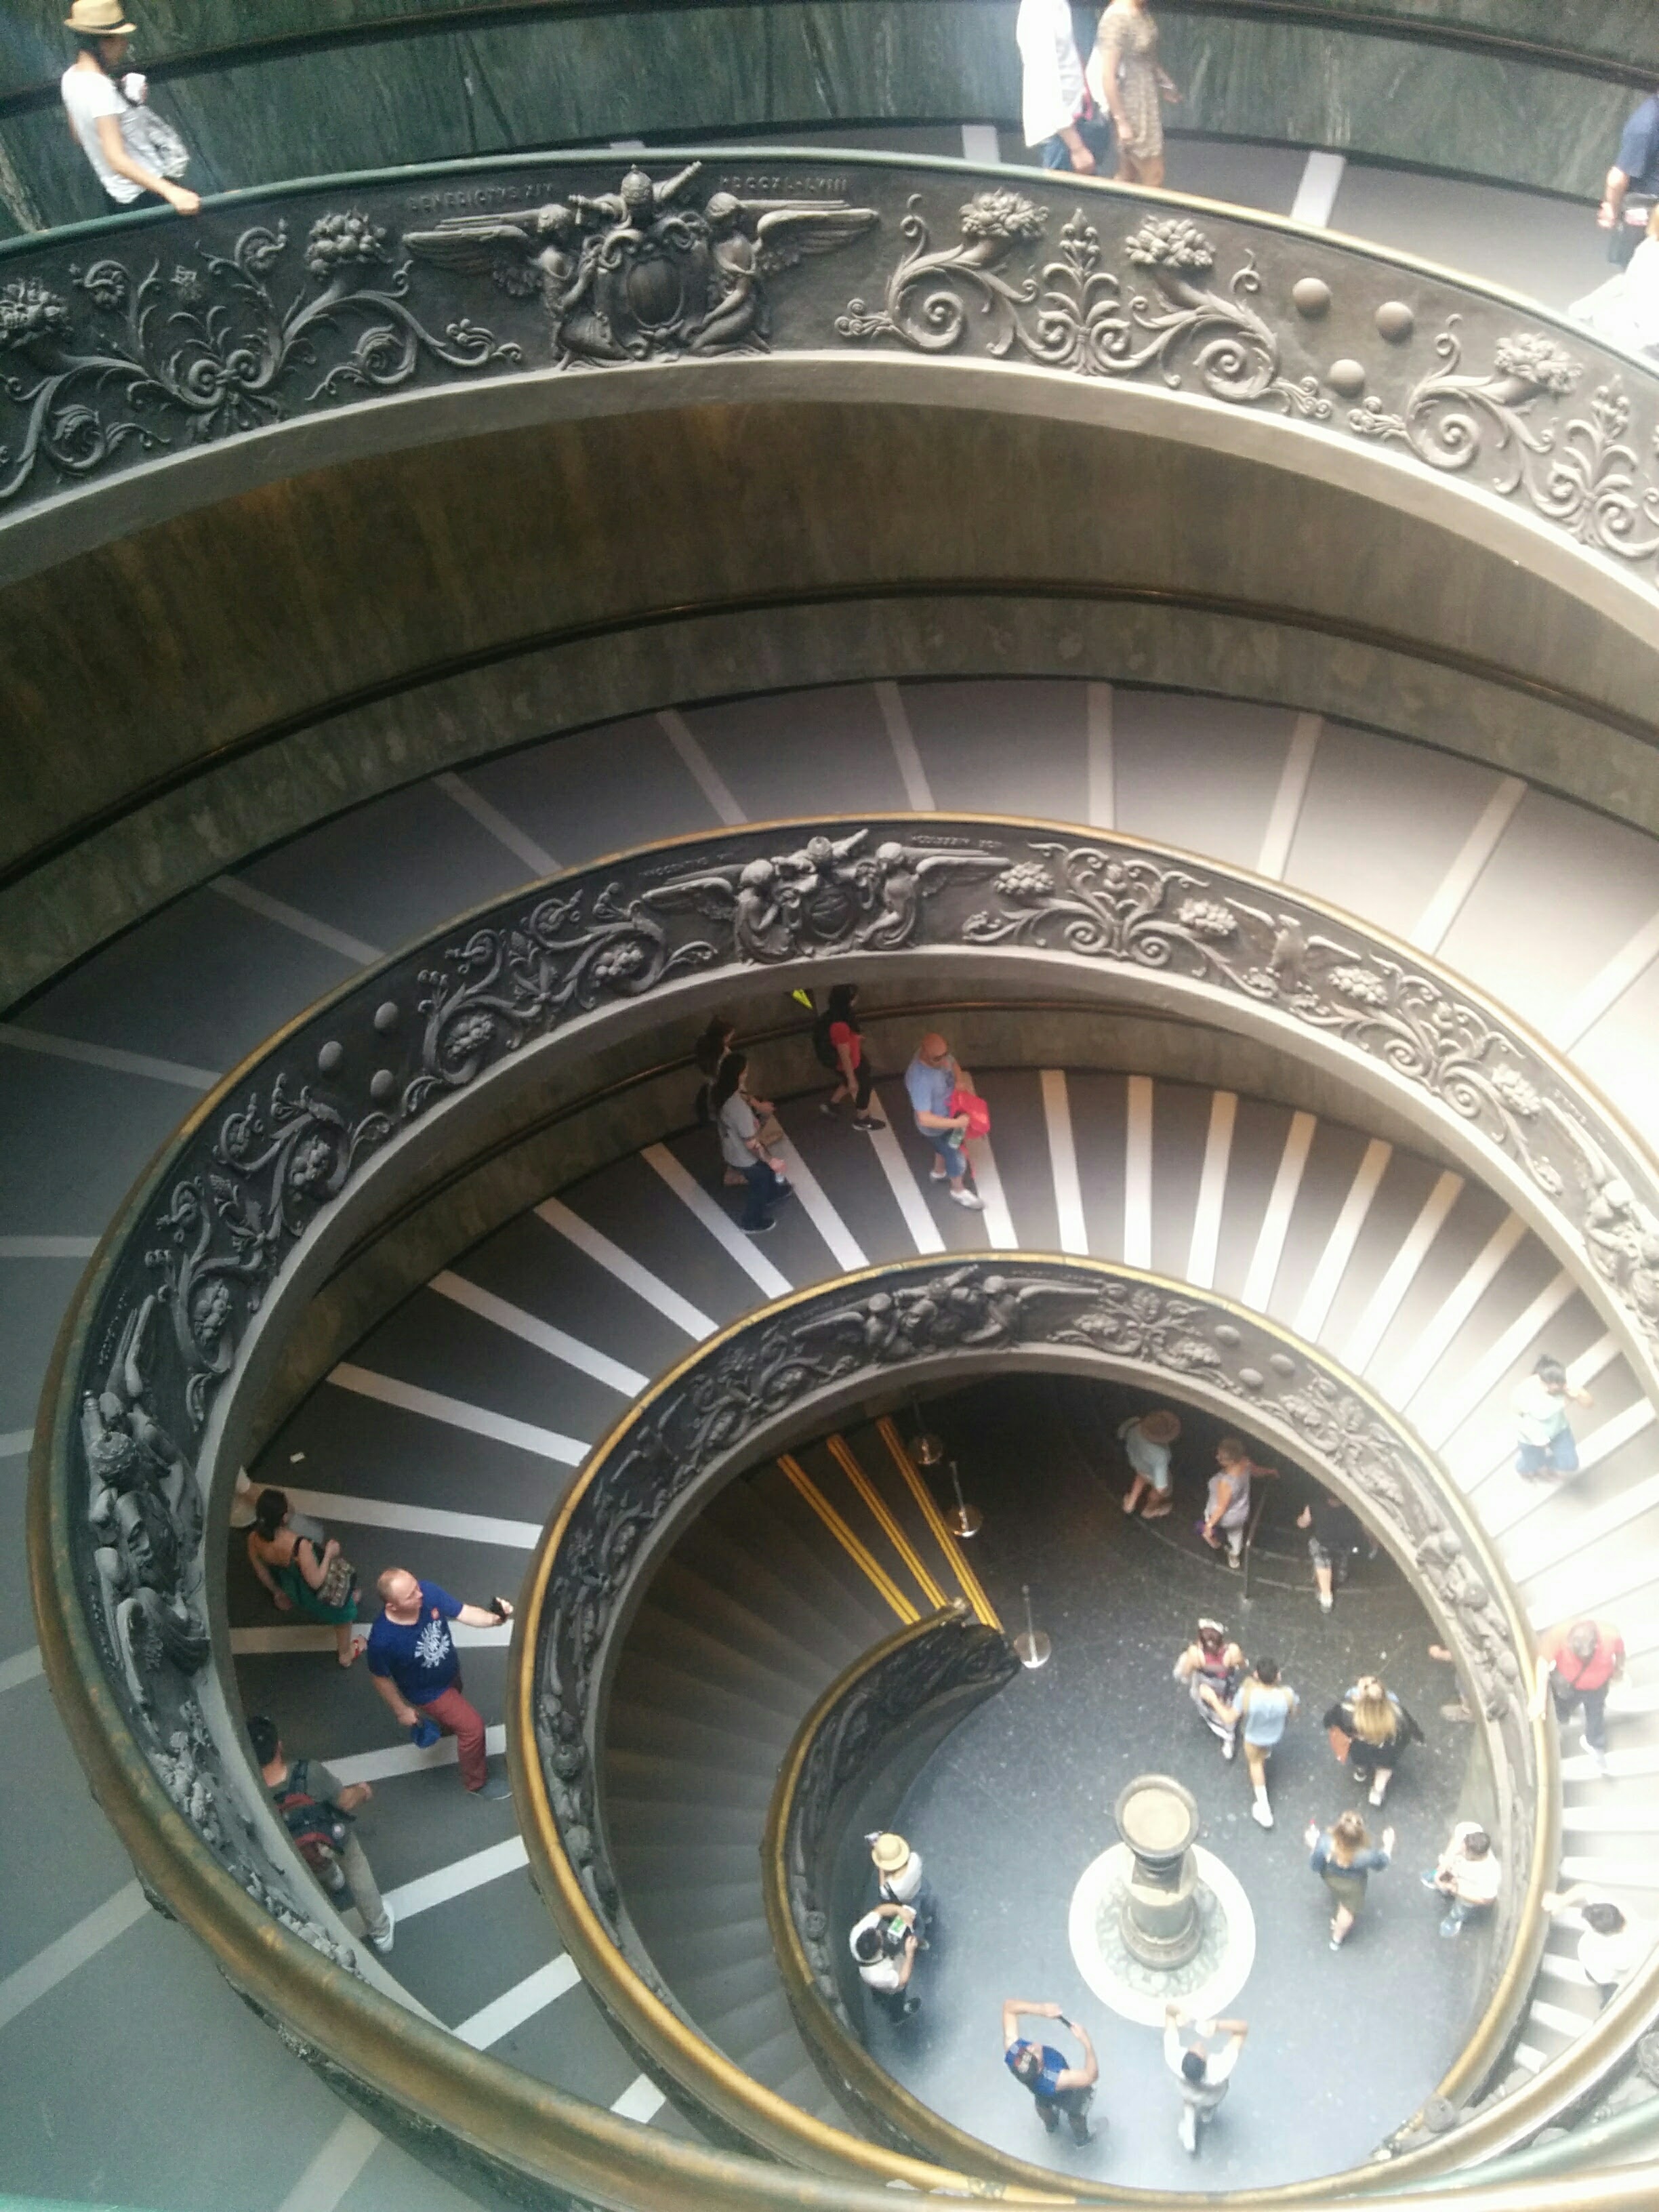 Spiral staircase in the Vatican